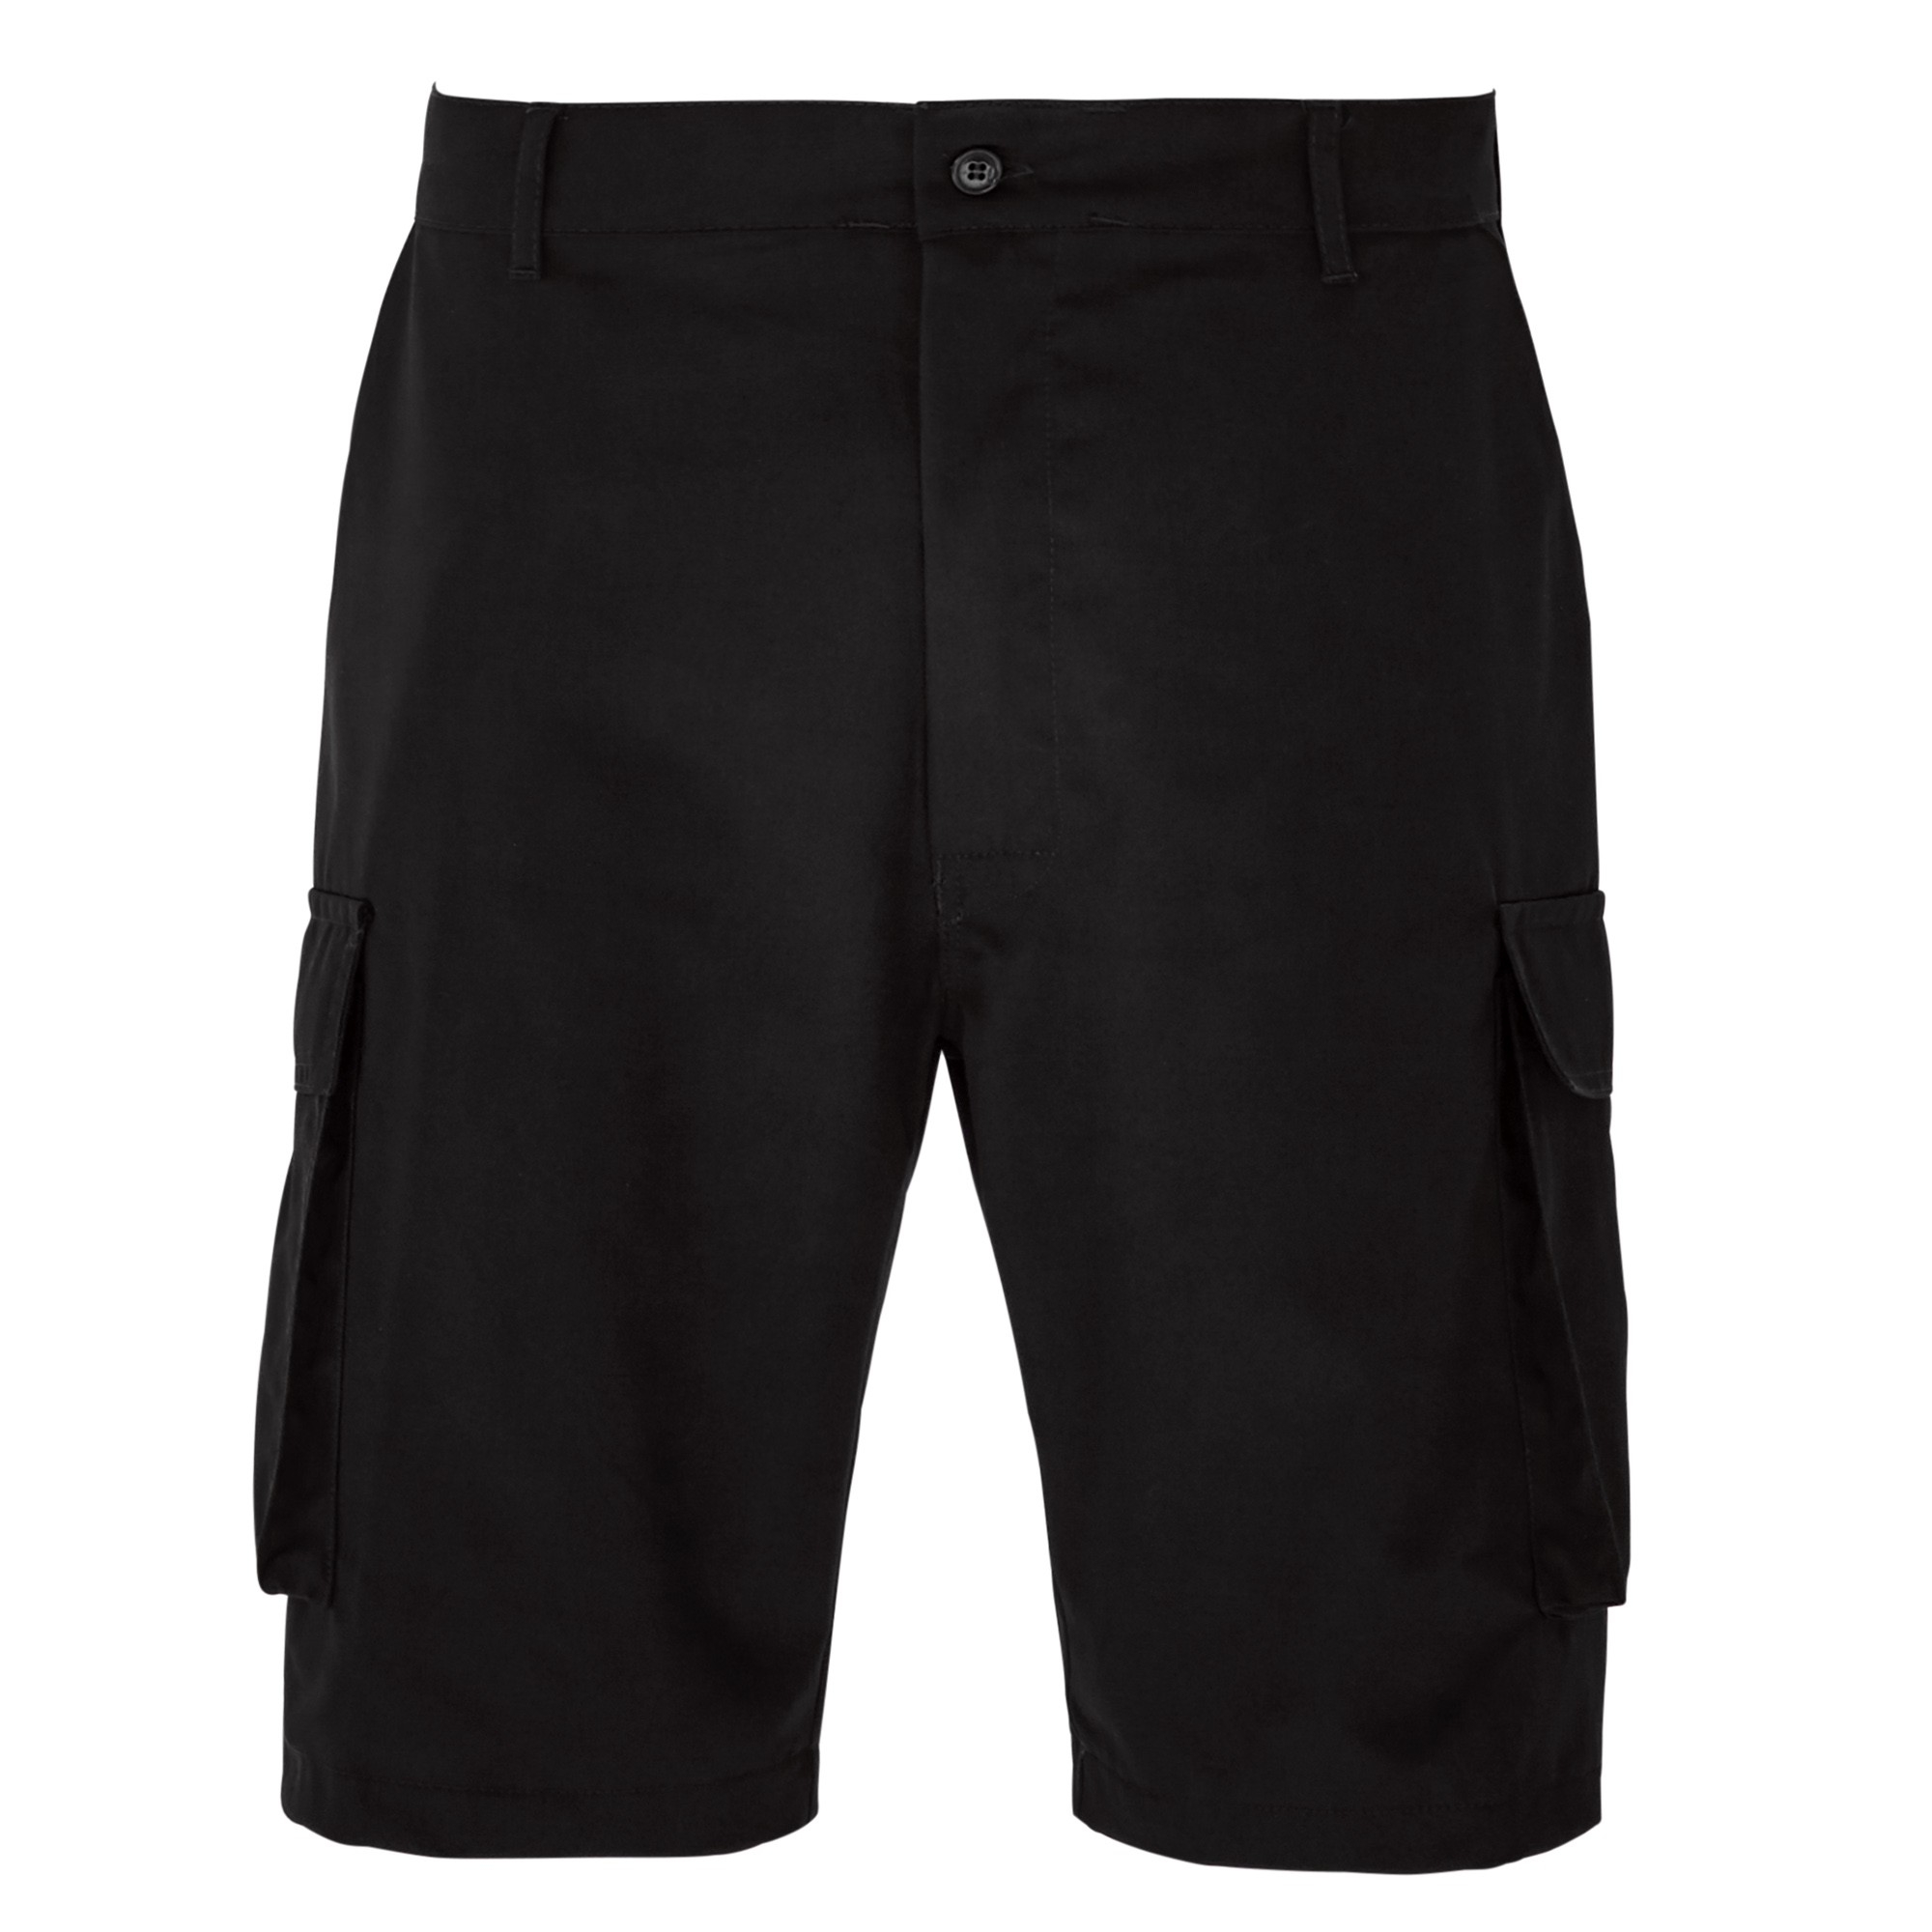 Cargo Shorts with Side Pouch Pockets, Black, Waist 44